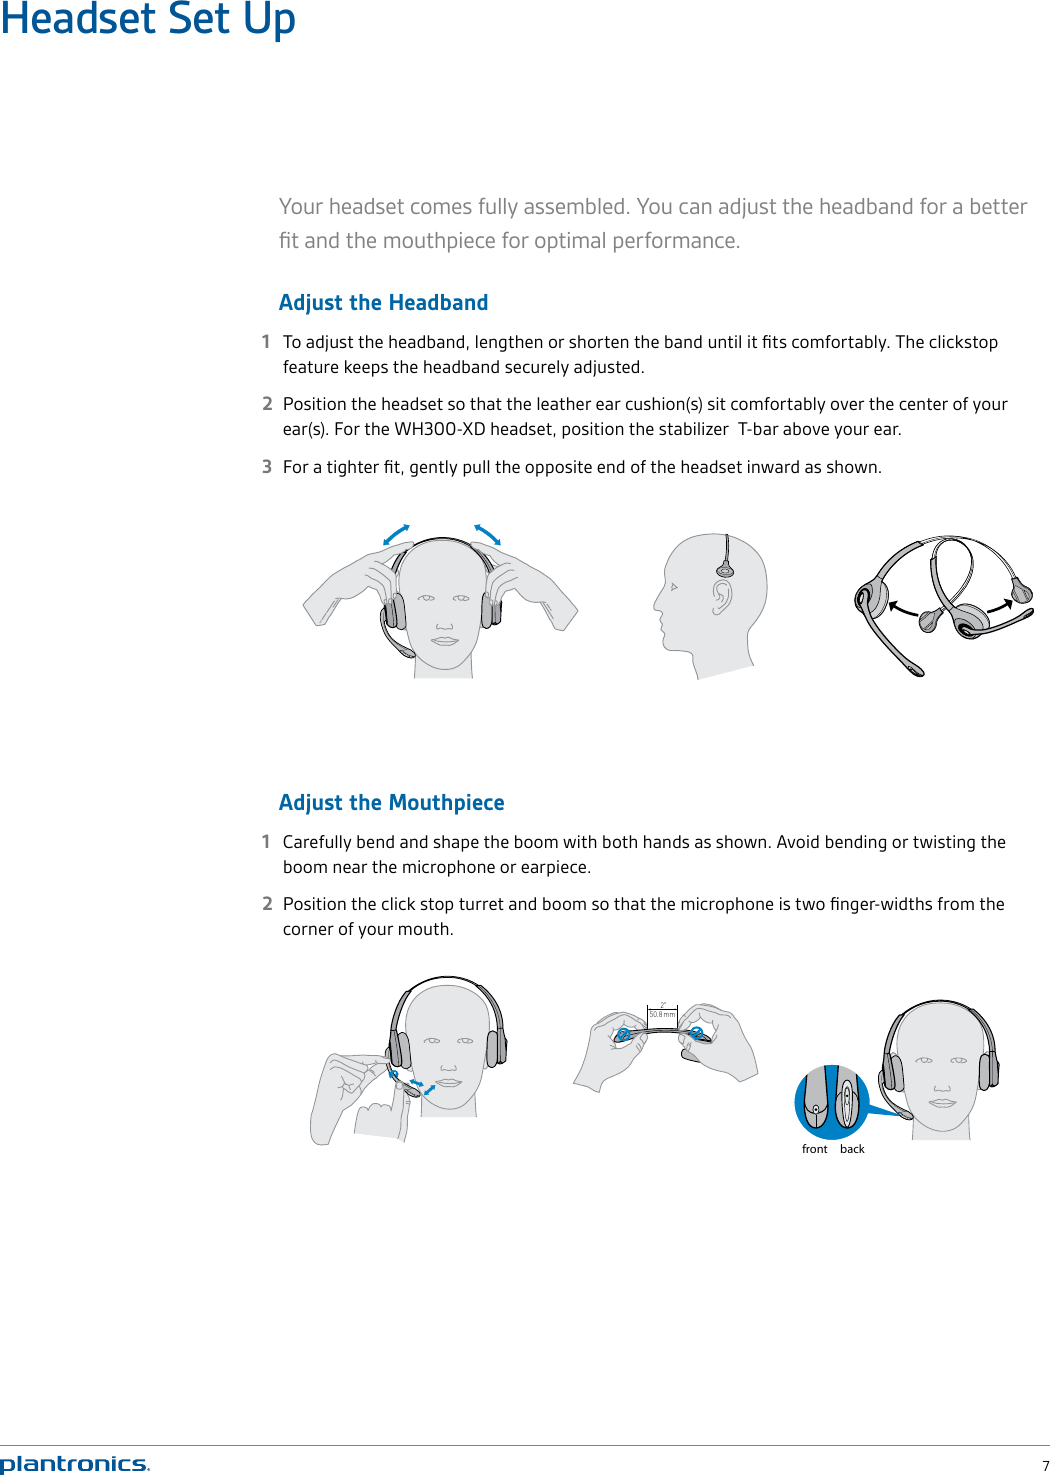  7Headset Set UpYour headset comes fully assembled. You can adjust the headband for a better ﬁt and the mouthpiece for optimal performance. Adjust the Headband1  To adjust the headband, lengthen or shorten the band until it ﬁts comfortably. The clickstop feature keeps the headband securely adjusted. 2  Position the headset so that the leather ear cushion(s) sit comfortably over the center of your ear(s). For the WH300-XD headset, position the stabilizer  T-bar above your ear. 3  For a tighter ﬁt, gently pull the opposite end of the headset inward as shown.Adjust the Mouthpiece1  Carefully bend and shape the boom with both hands as shown. Avoid bending or twisting the boom near the microphone or earpiece.2  Position the click stop turret and boom so that the microphone is two ﬁnger-widths from the corner of your mouth. 2&quot;50.8 mmfront back 2&quot;50.8 mmfront back